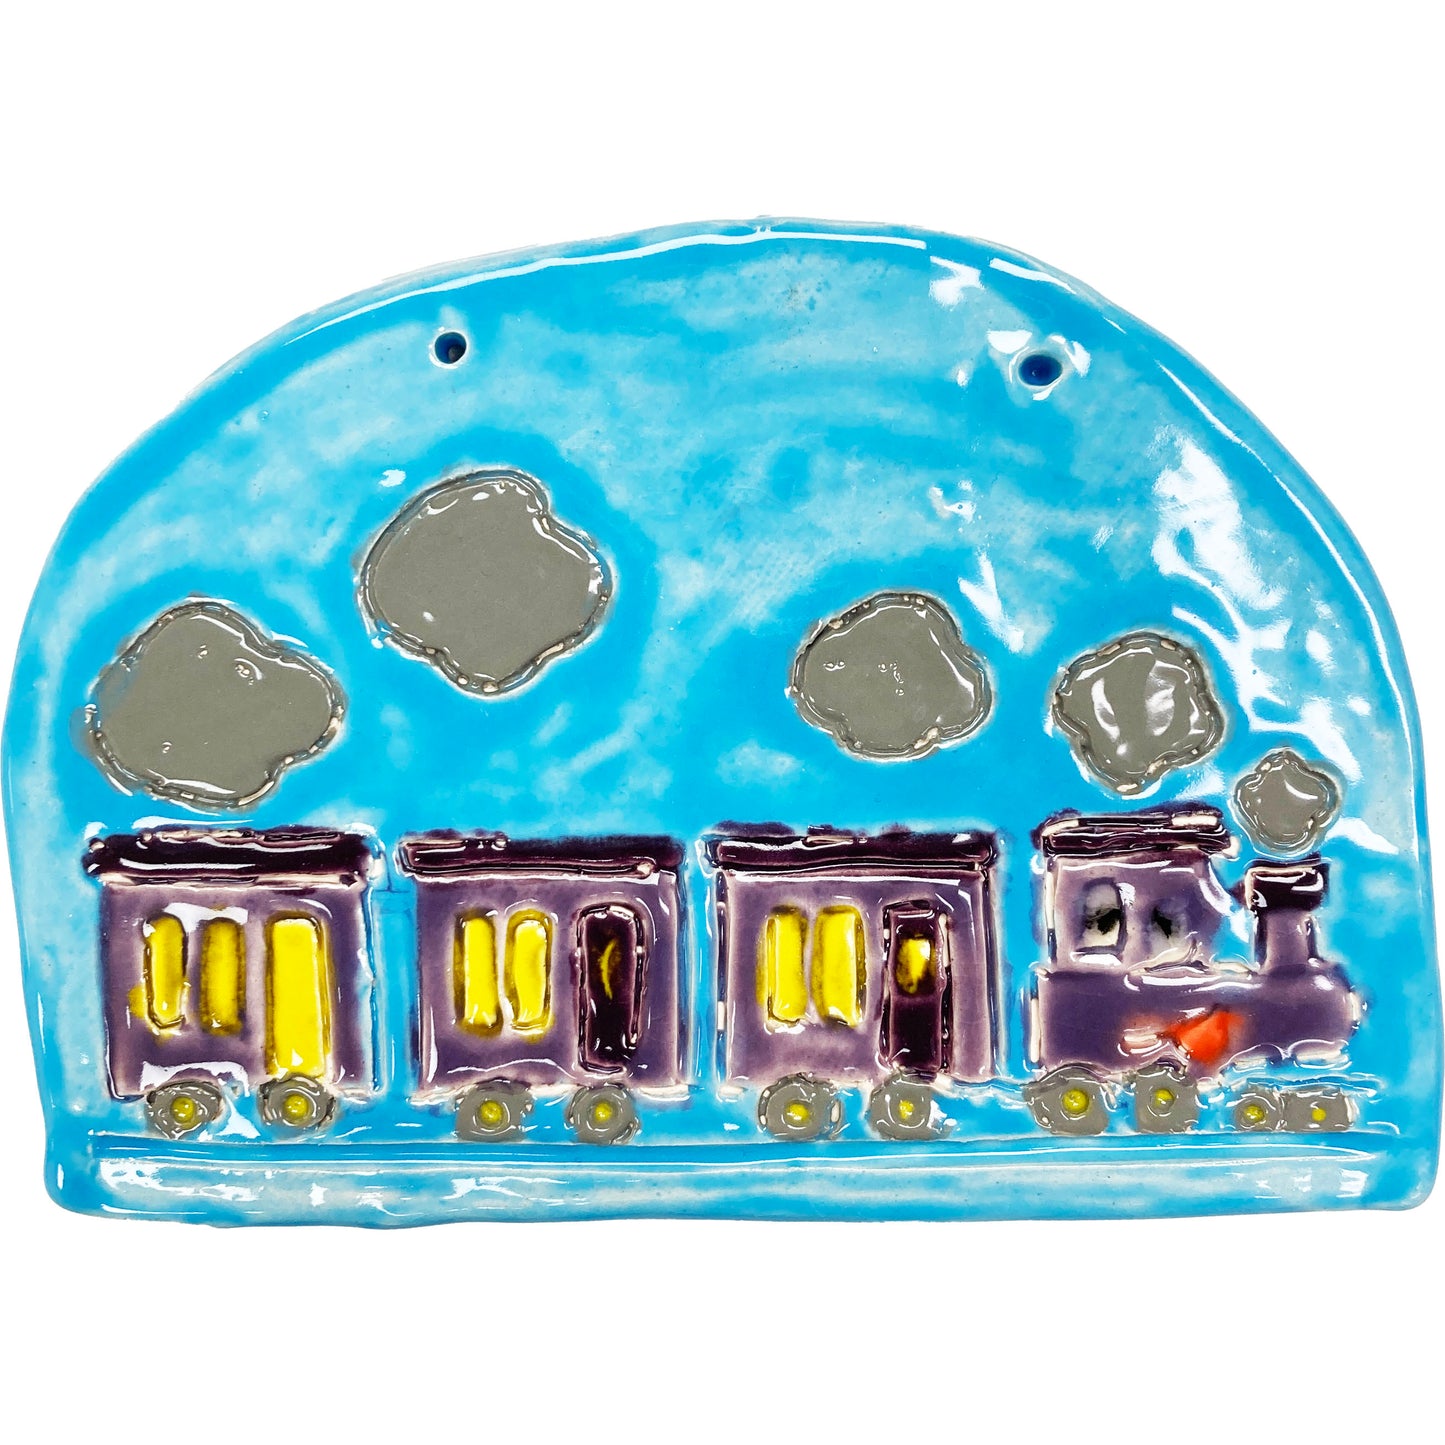 WATCH Resources Art Guild - Ceramic Arts Handmade Clay Crafts 8-inch x 5-inch Glazed Train made by Lisa Uptain